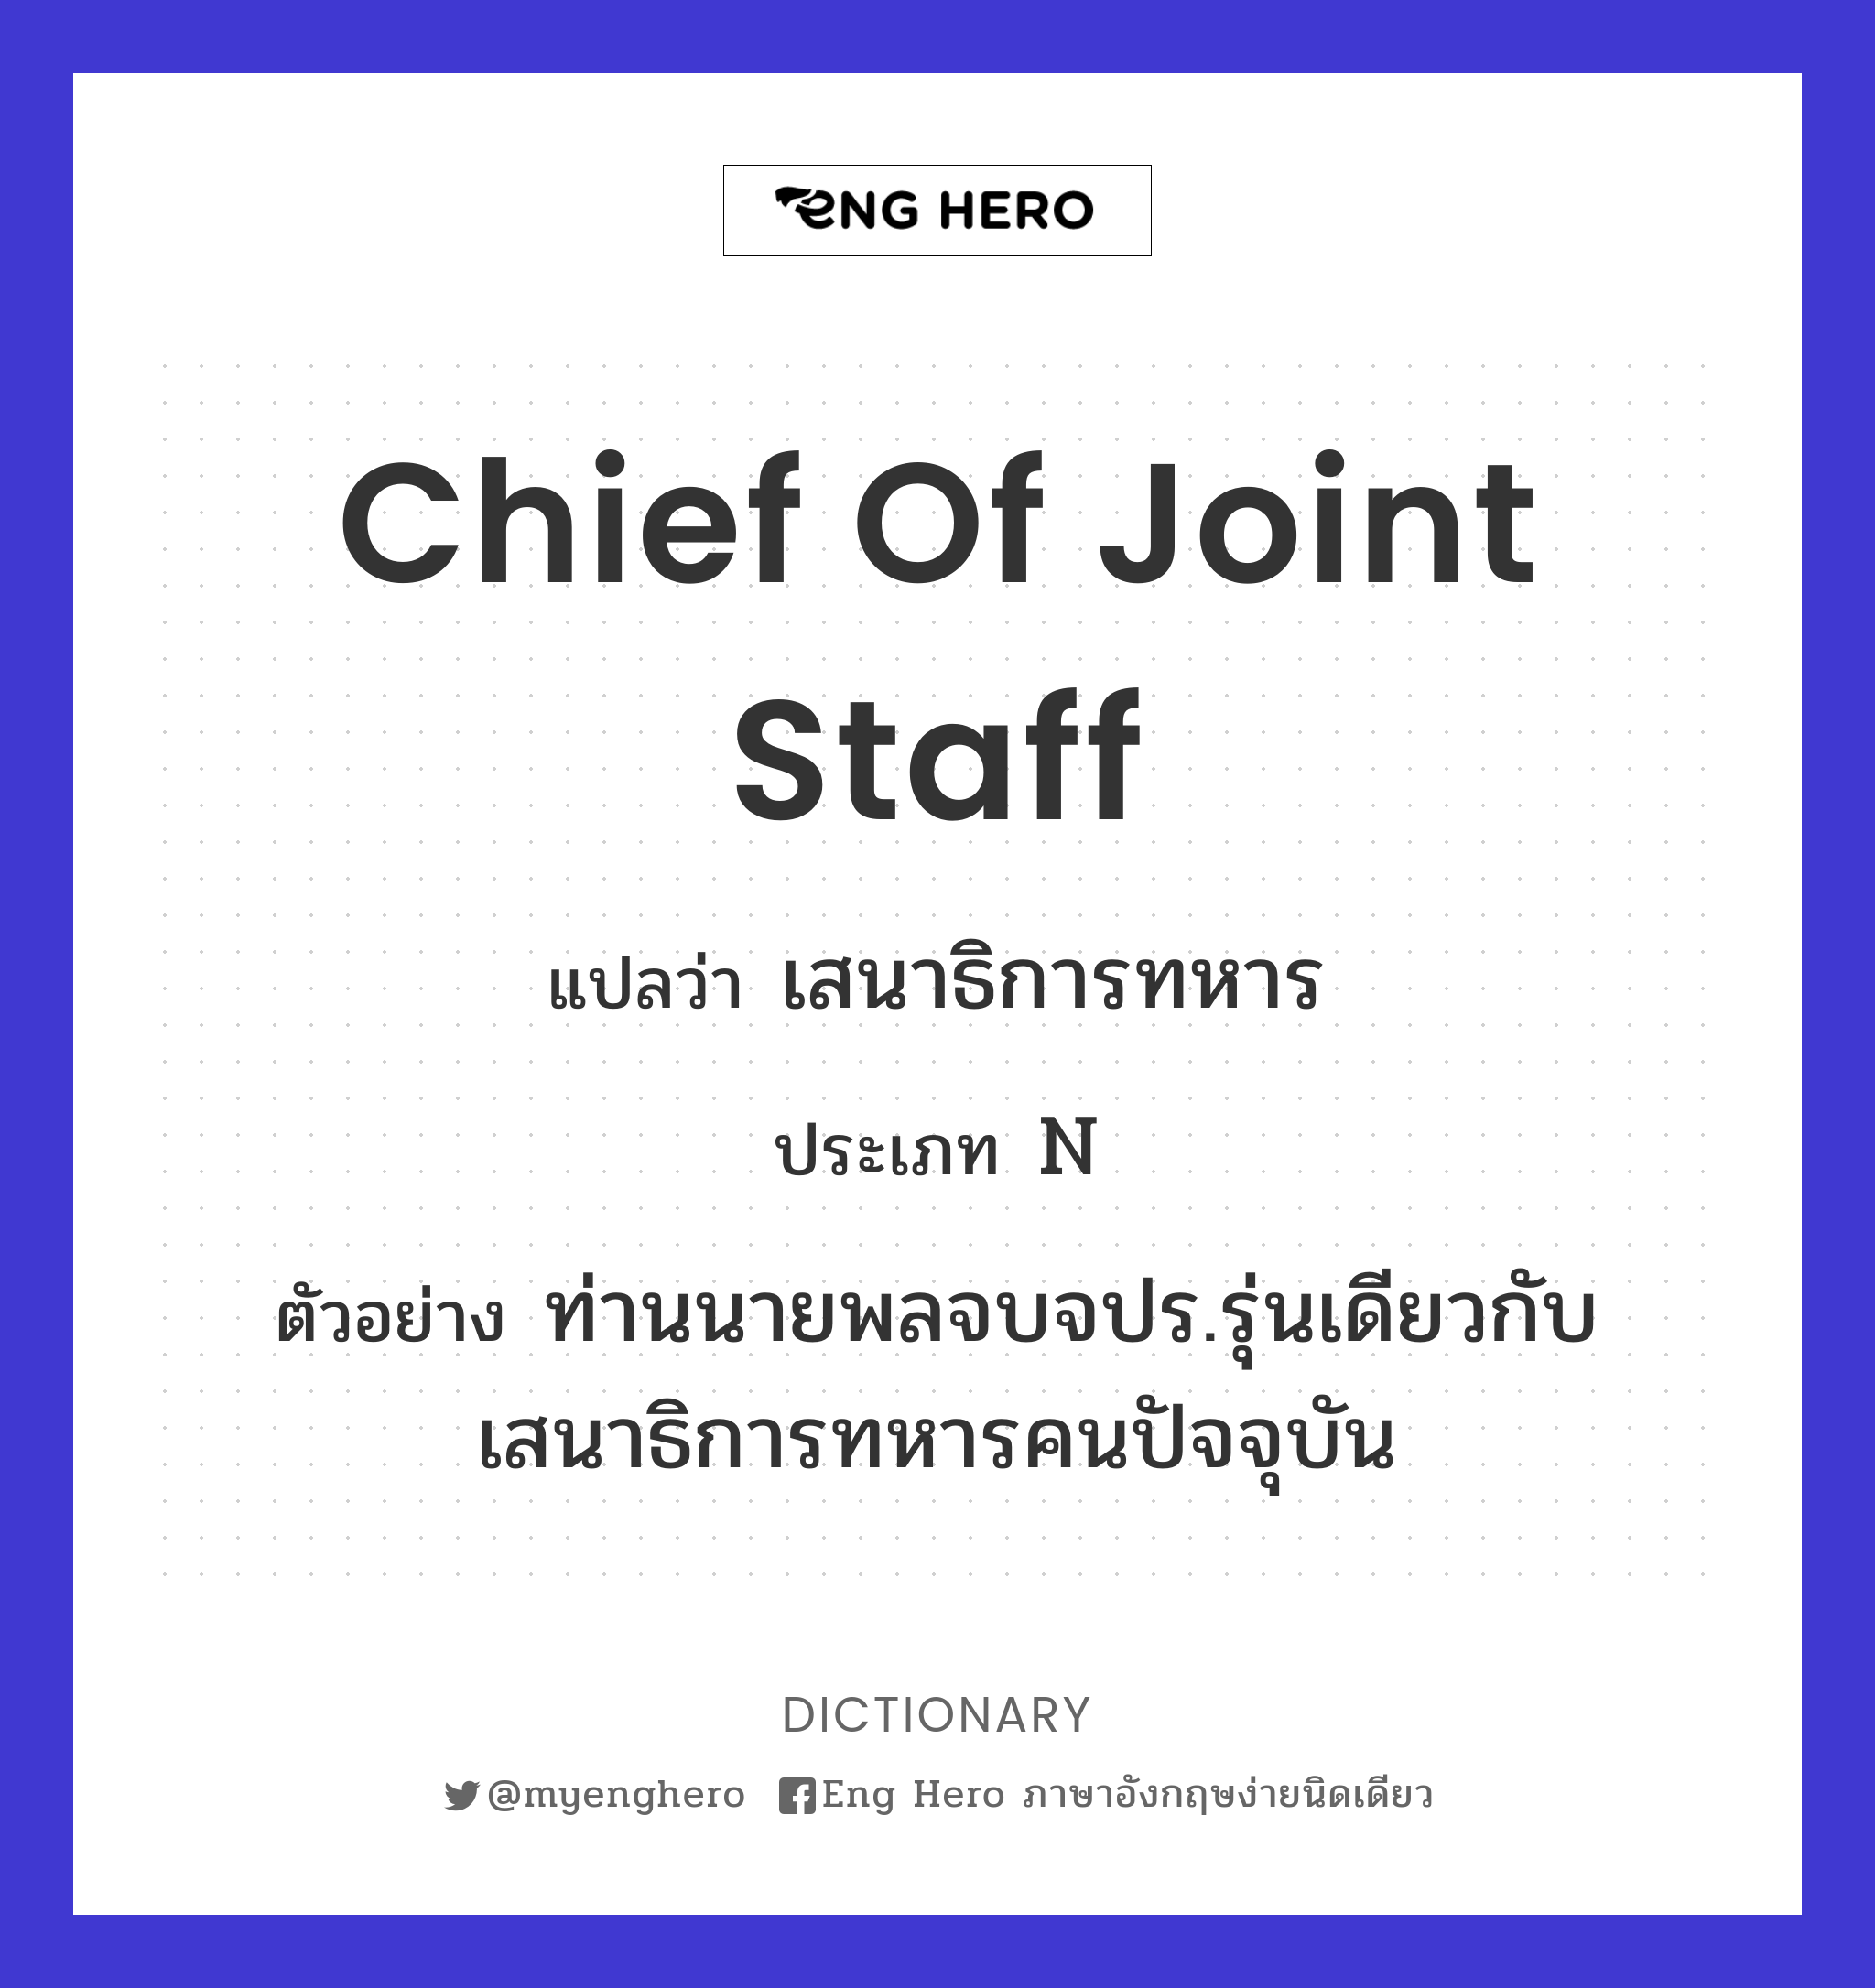 Chief of Joint Staff